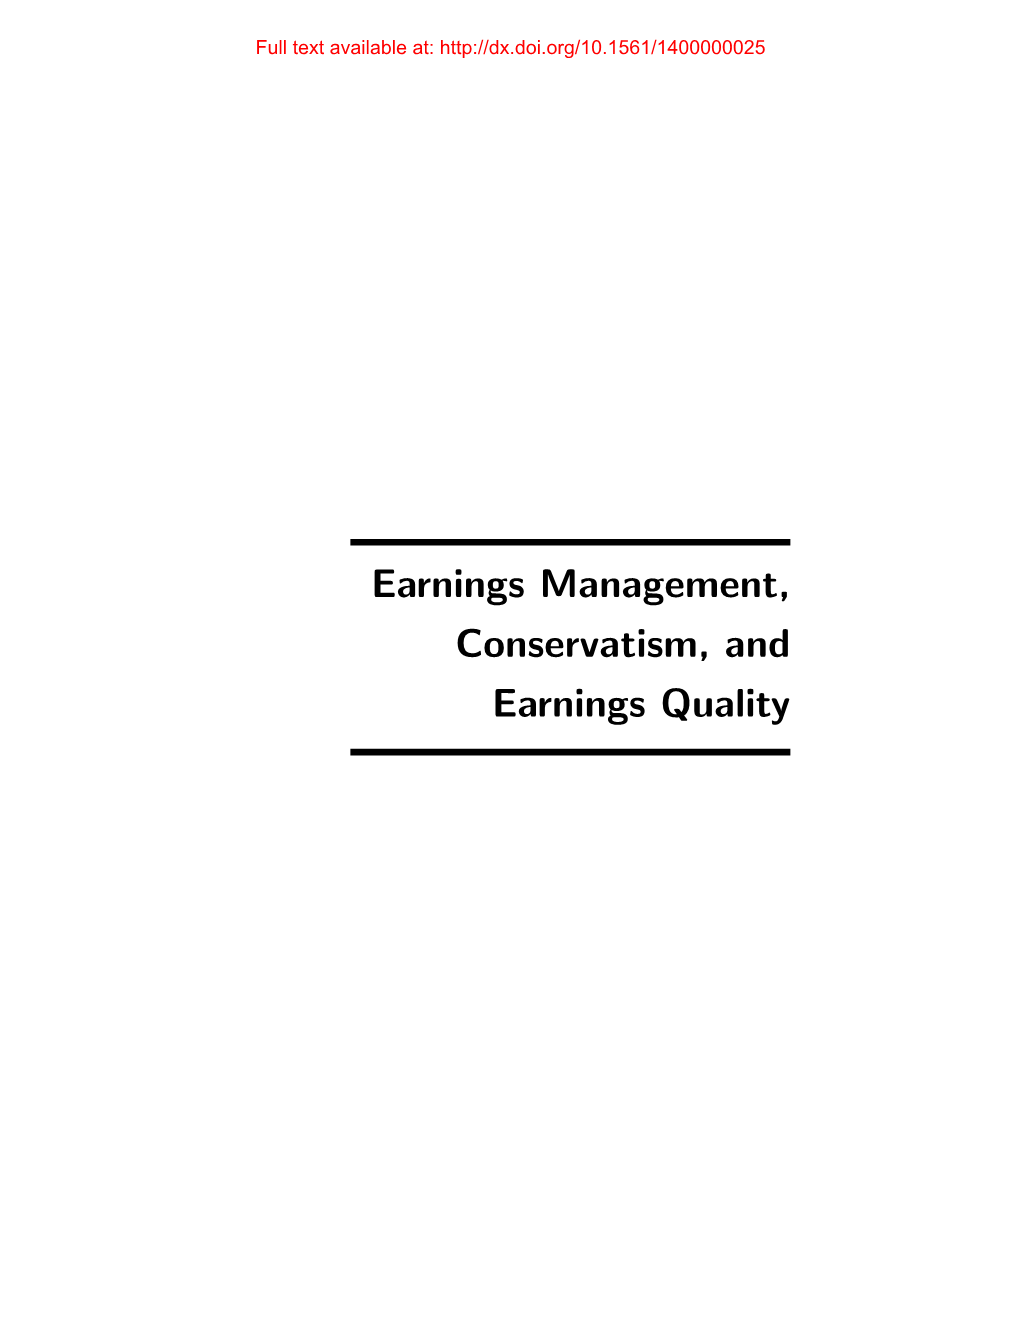 Earnings Management, Conservatism, and Earnings Quality Full Text Available At